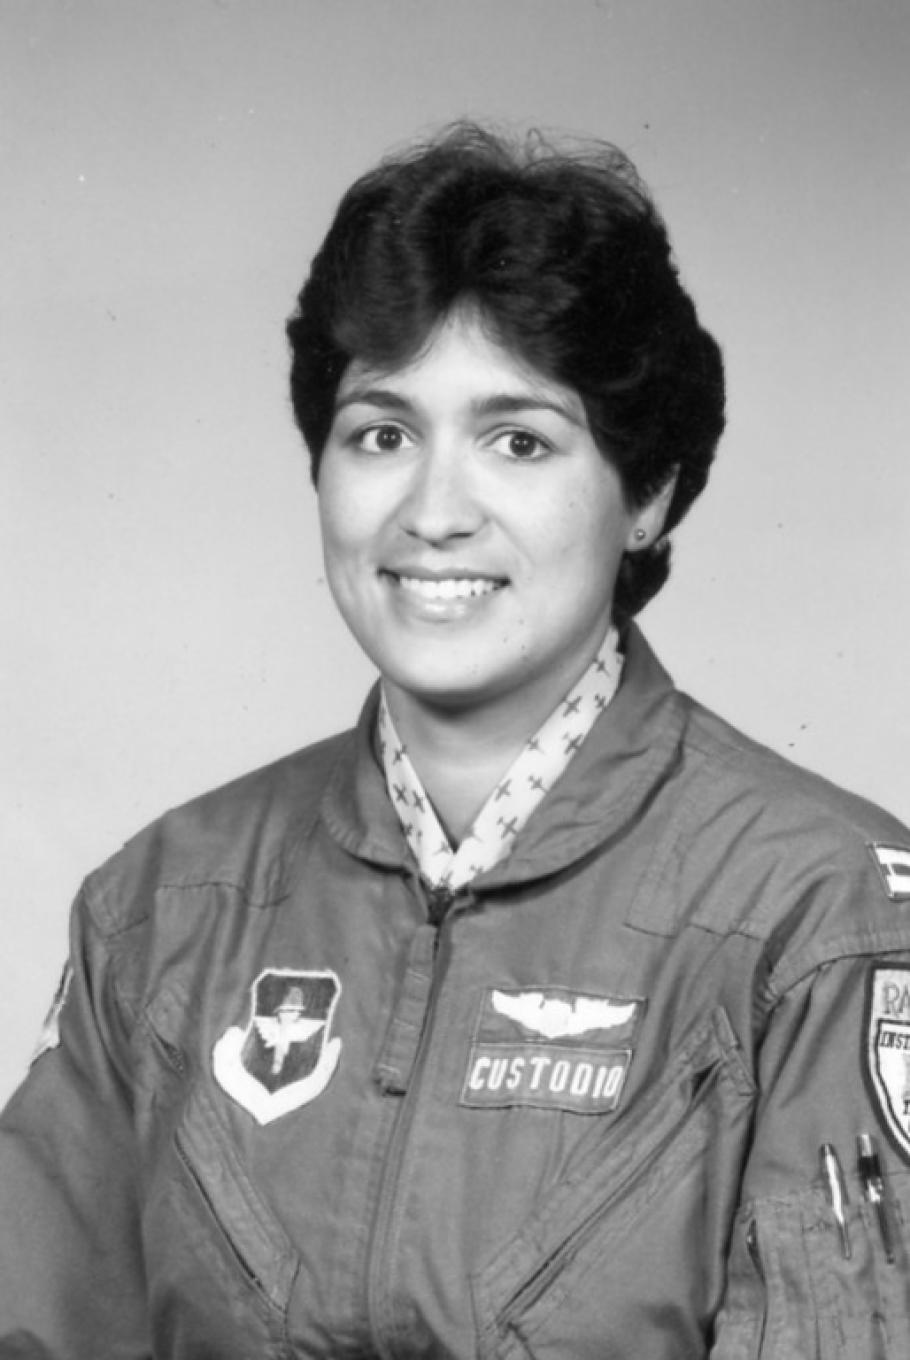 Black and white portrait of woman with short wavy hair, parted in the middle.  Stud earring in left ear (right ear is not visible).  She is wearing a dark jacket with a zipper with a cloth pull.  Patch on her right side (the left of the image) features a icon with wings.  Two patches on her left side (right of photo). Top is wings. Bottom is a nameplate that says "Custodio."  There are two pens in her left sleeve. Another patch is cut off by the edge. White collar with a dark airplane print under the jacket